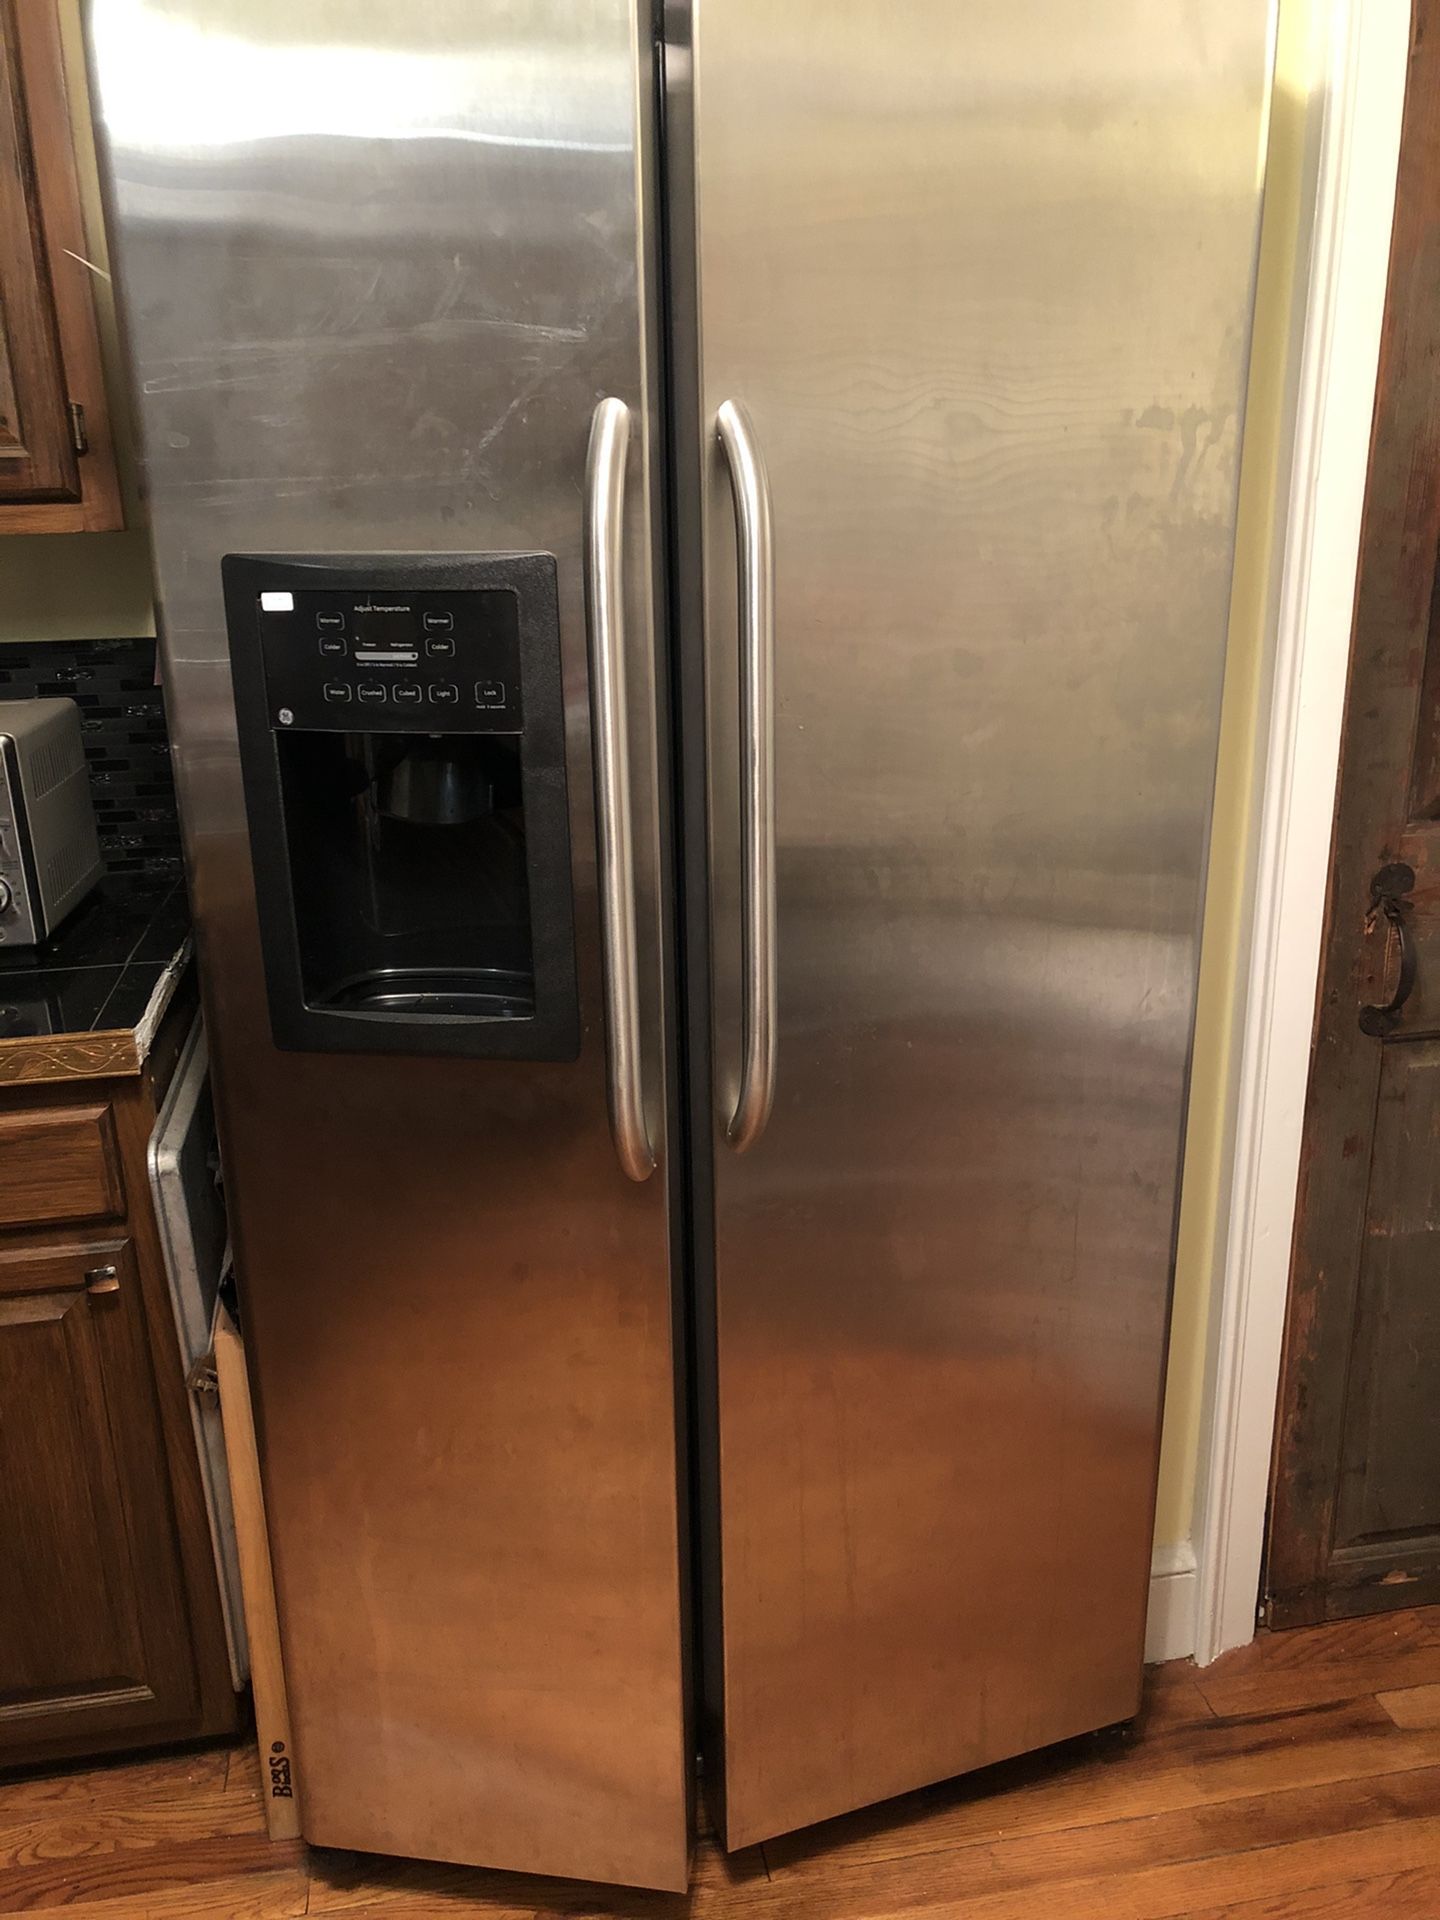 Stainless steel refrigerator $350or best offer! Everything works!